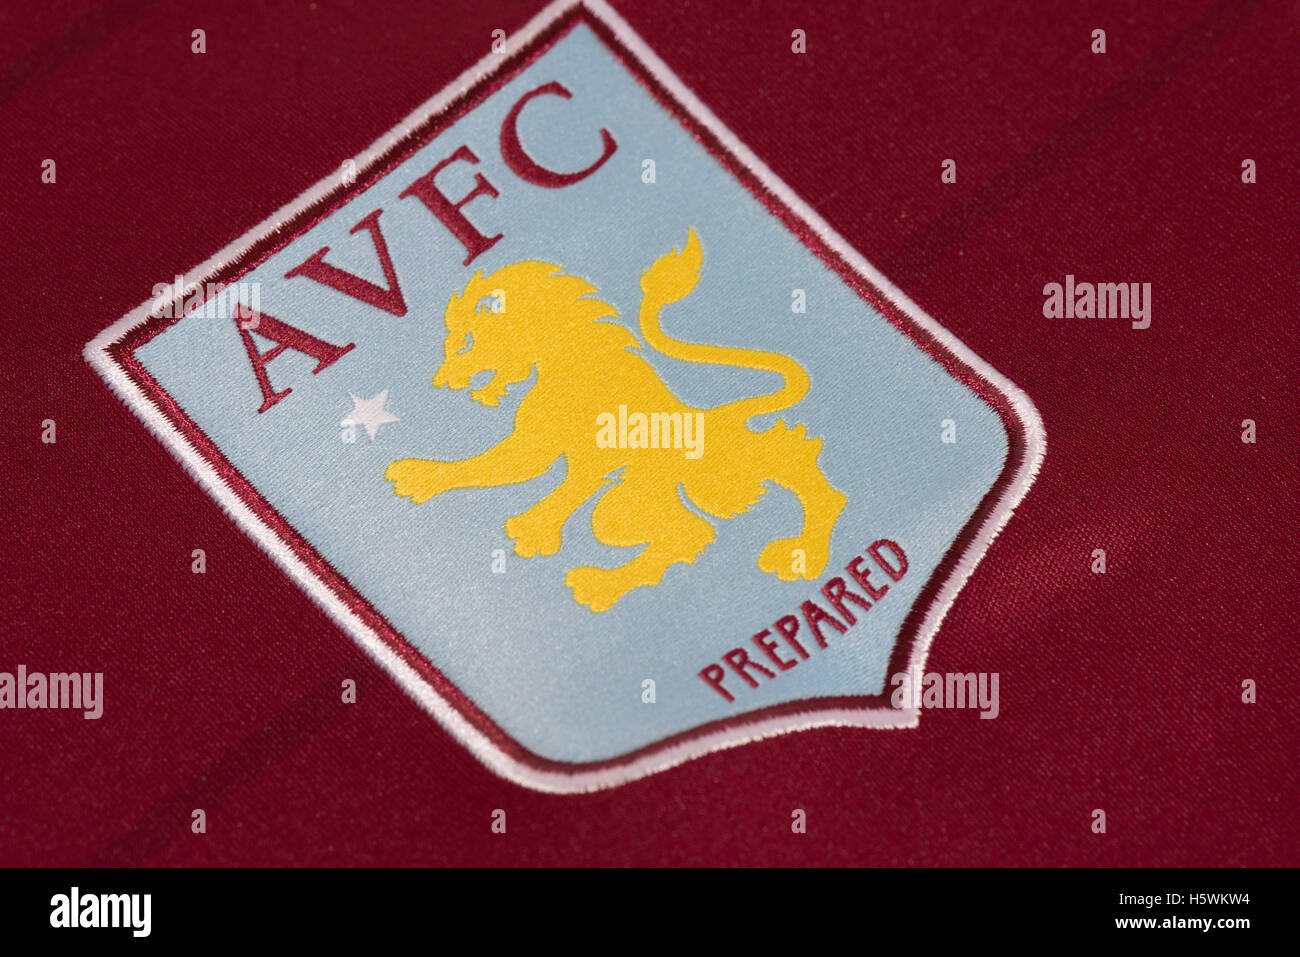 Aston Villa Badge High Resolution Stock Photography And Images Alamy